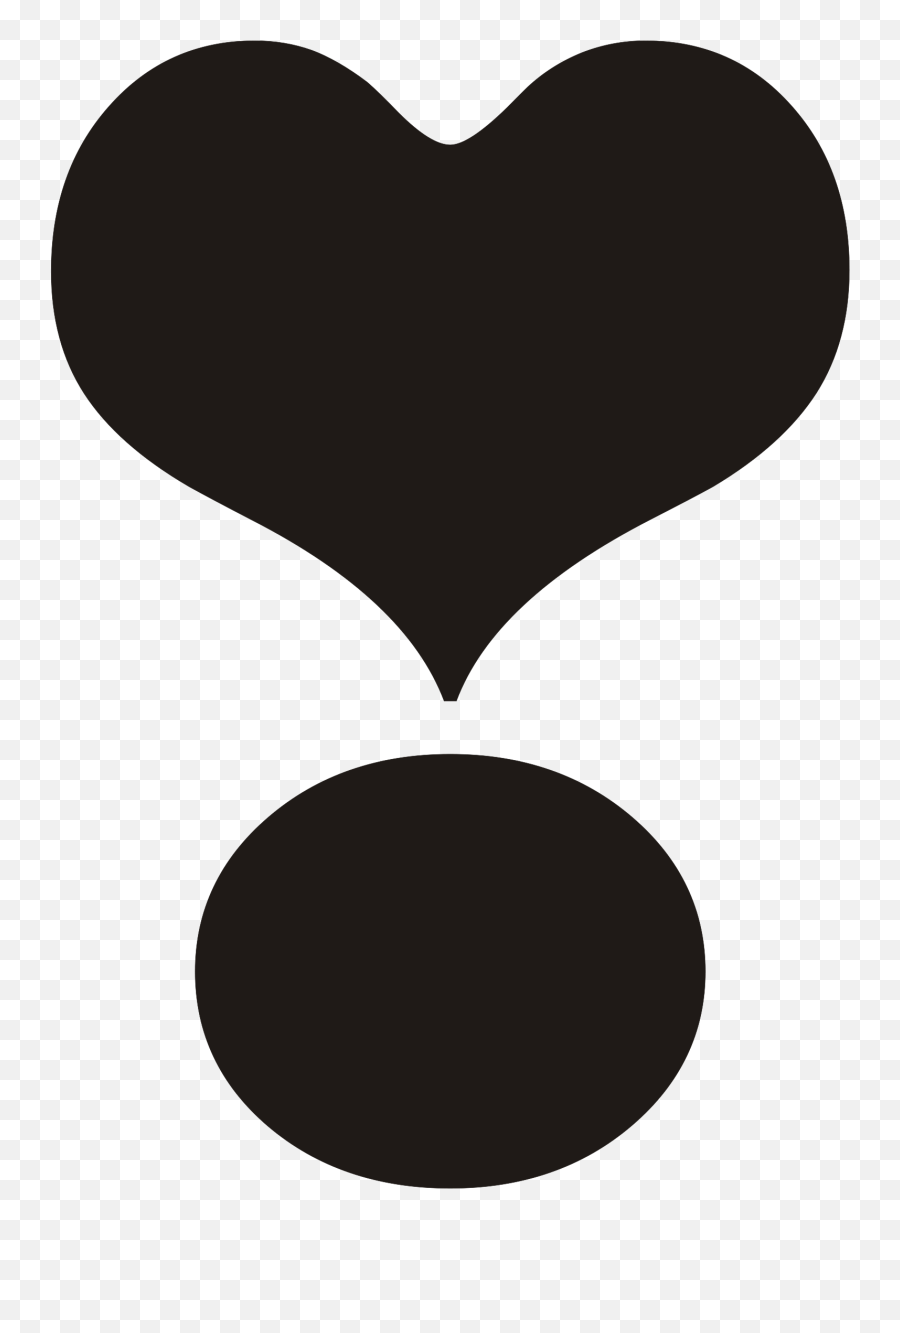 Heart Black Png Picture - Heart Exclamation Point Black Emoji,Heavy Black Heart Emoji